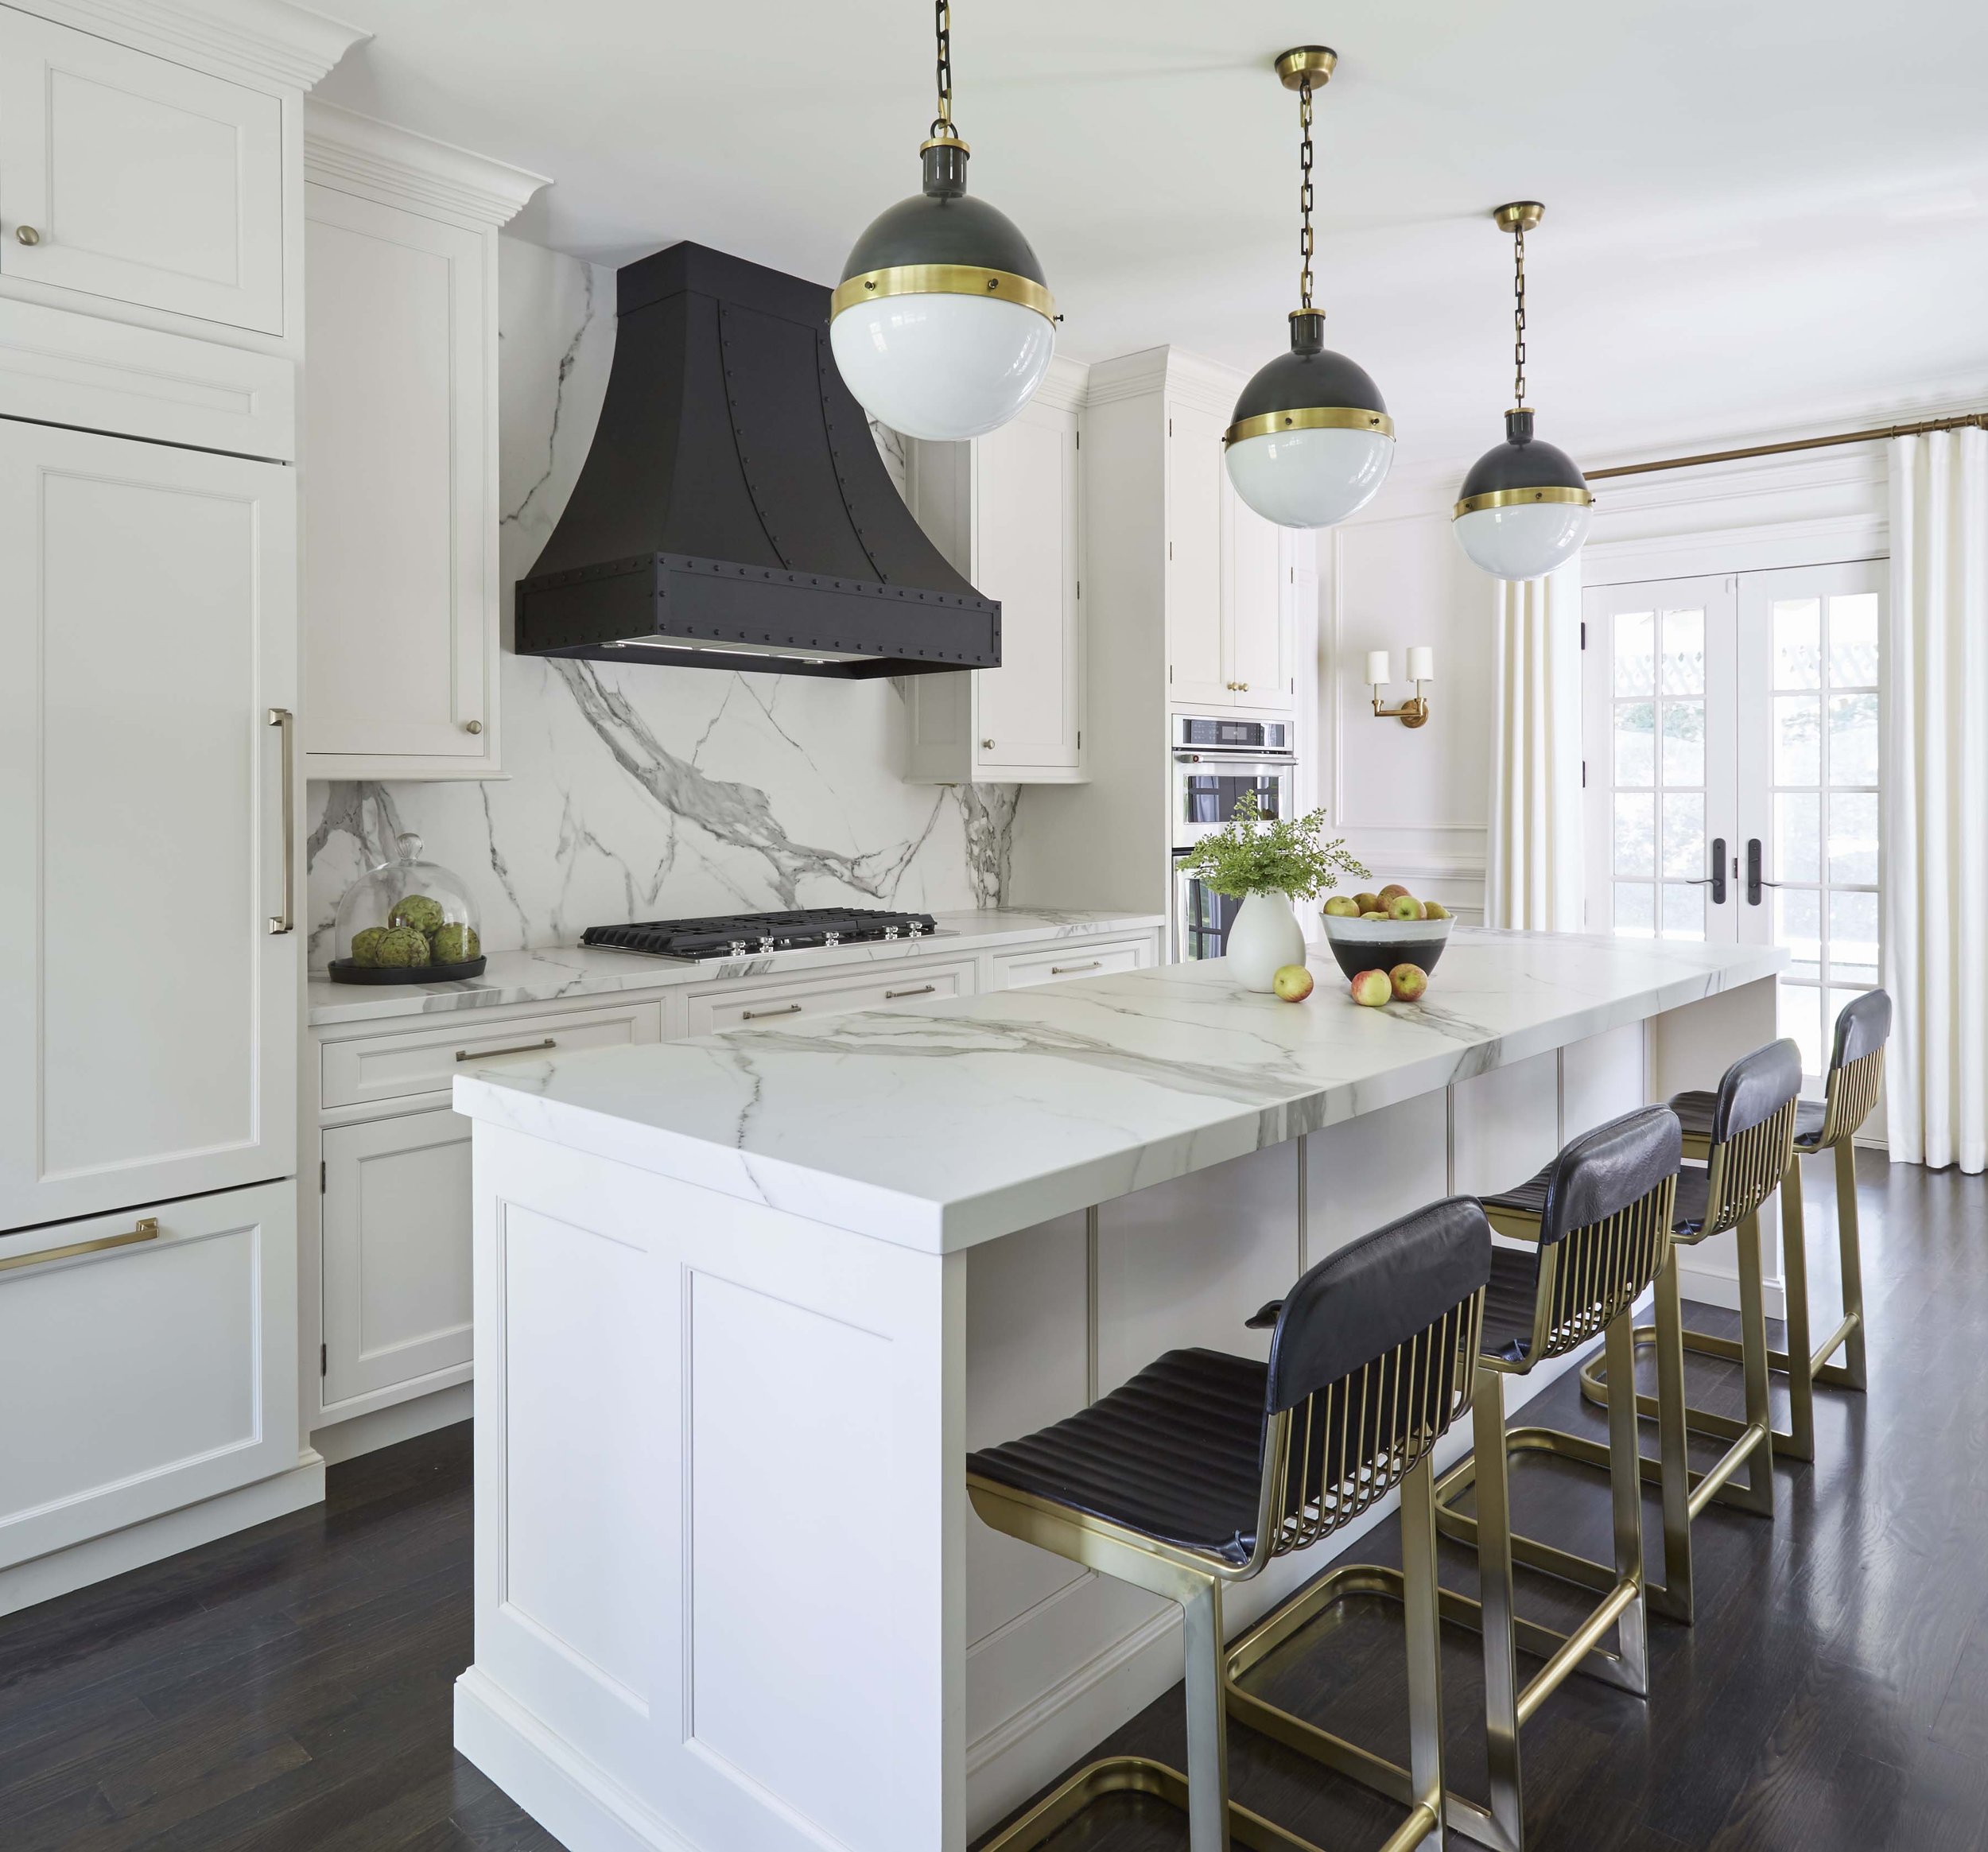 PROJECTS | Recent Work - PB Kitchen Design & Cabinetry